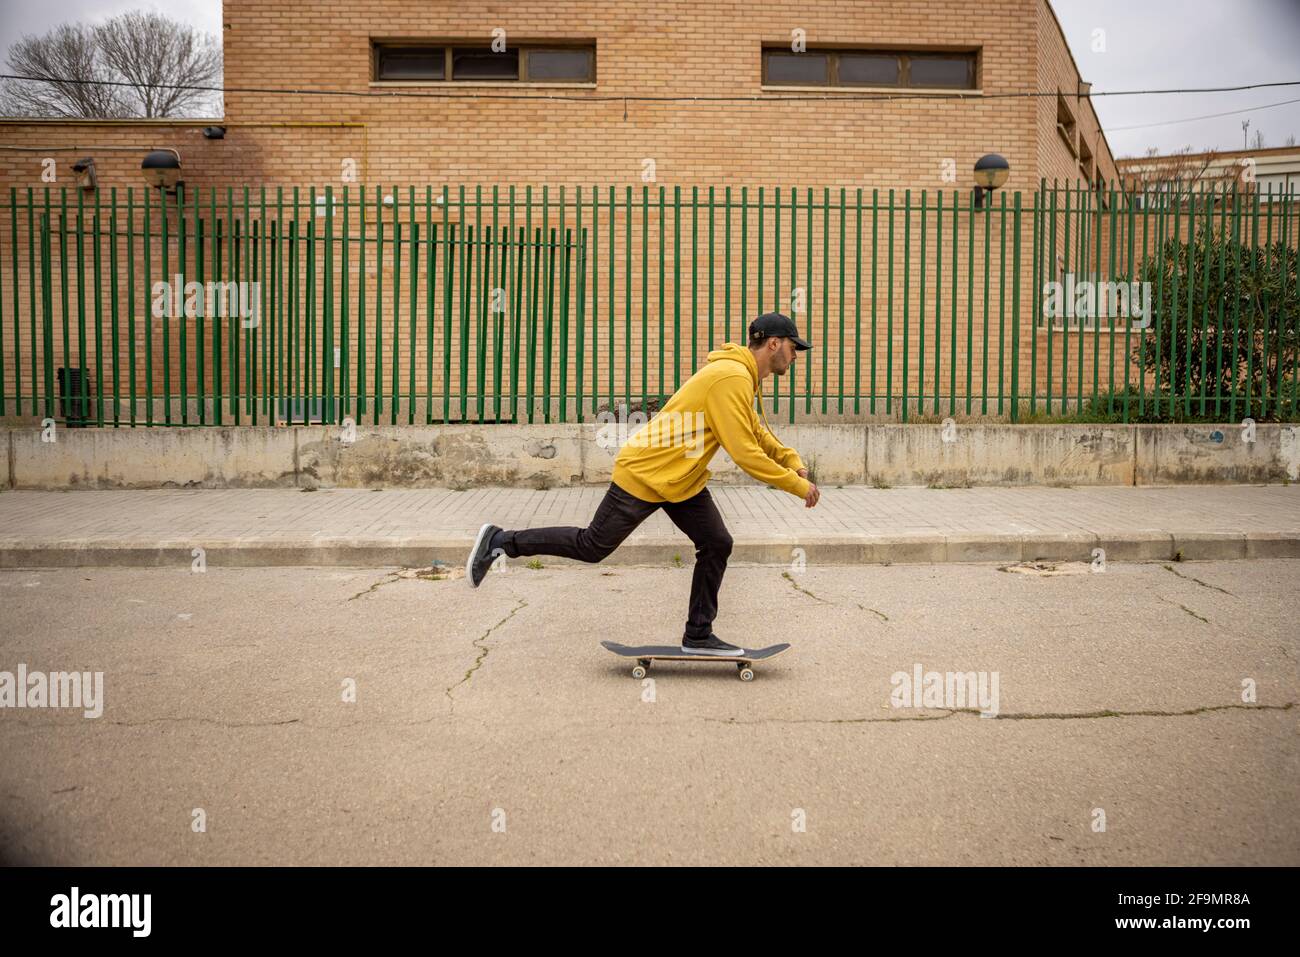 A young male skateboarding on the street in a yellow hoodie and a black cap Stock Photo